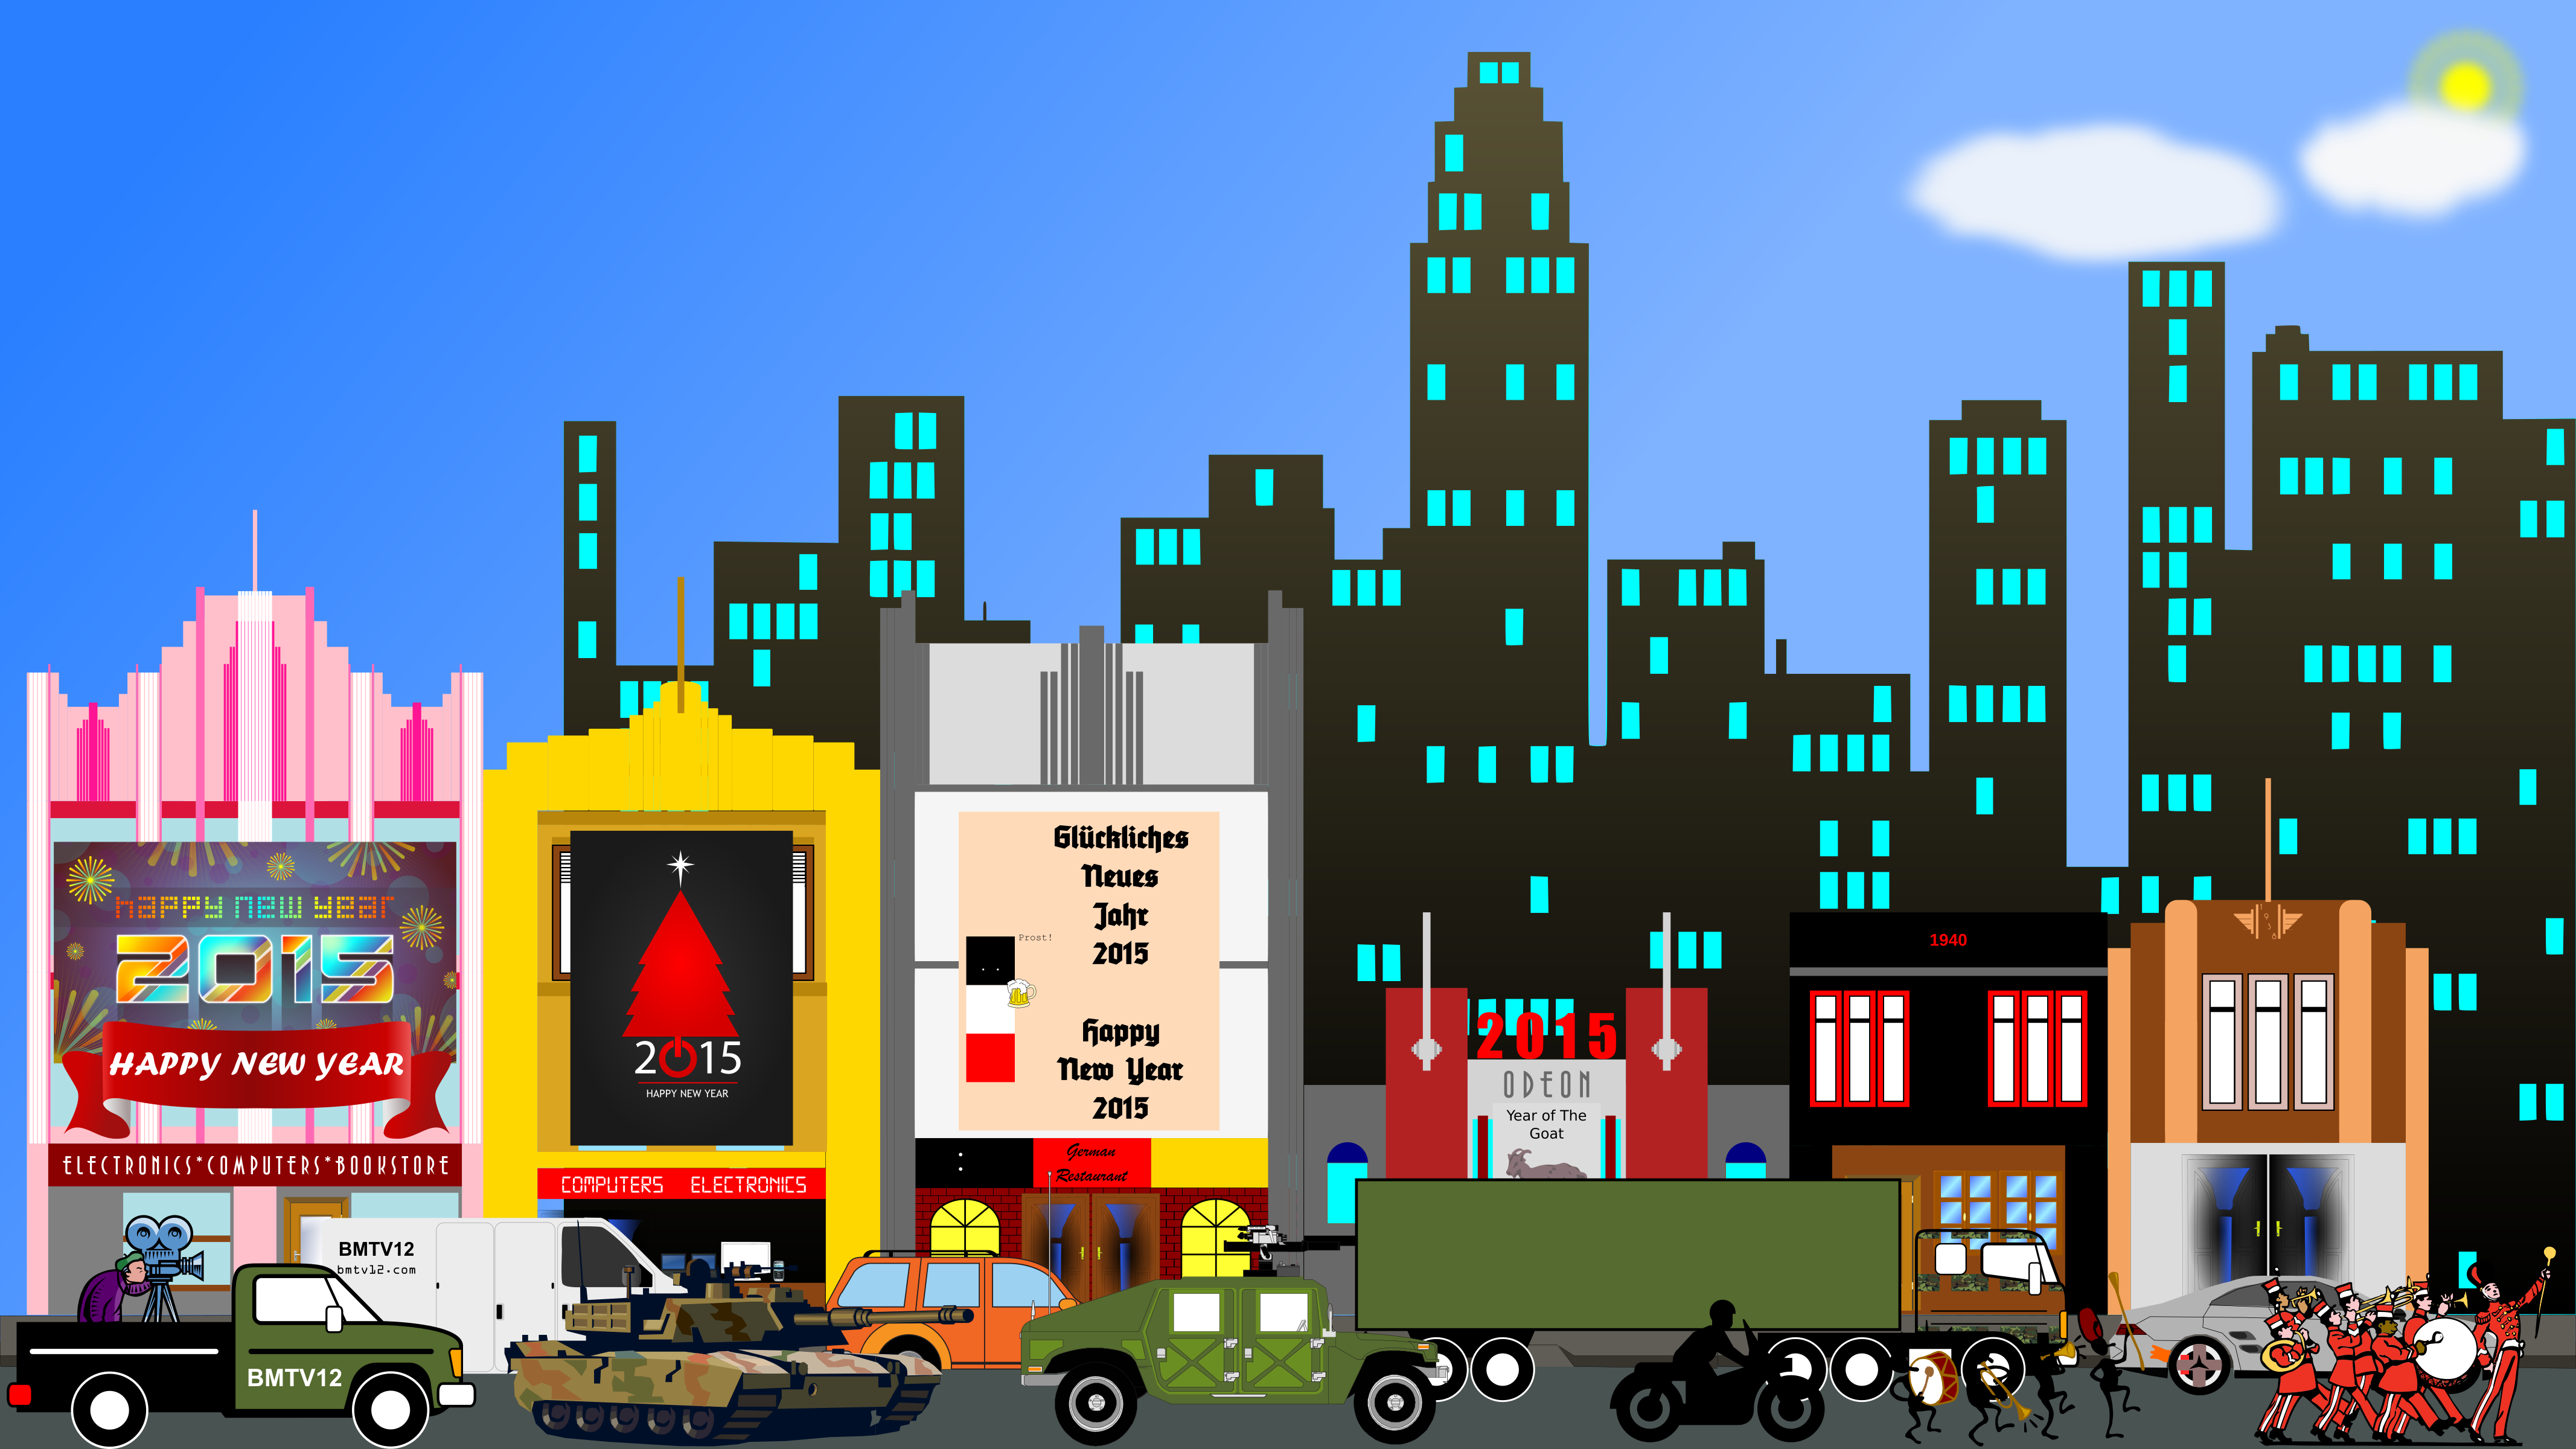 clipart picture of a city - photo #14